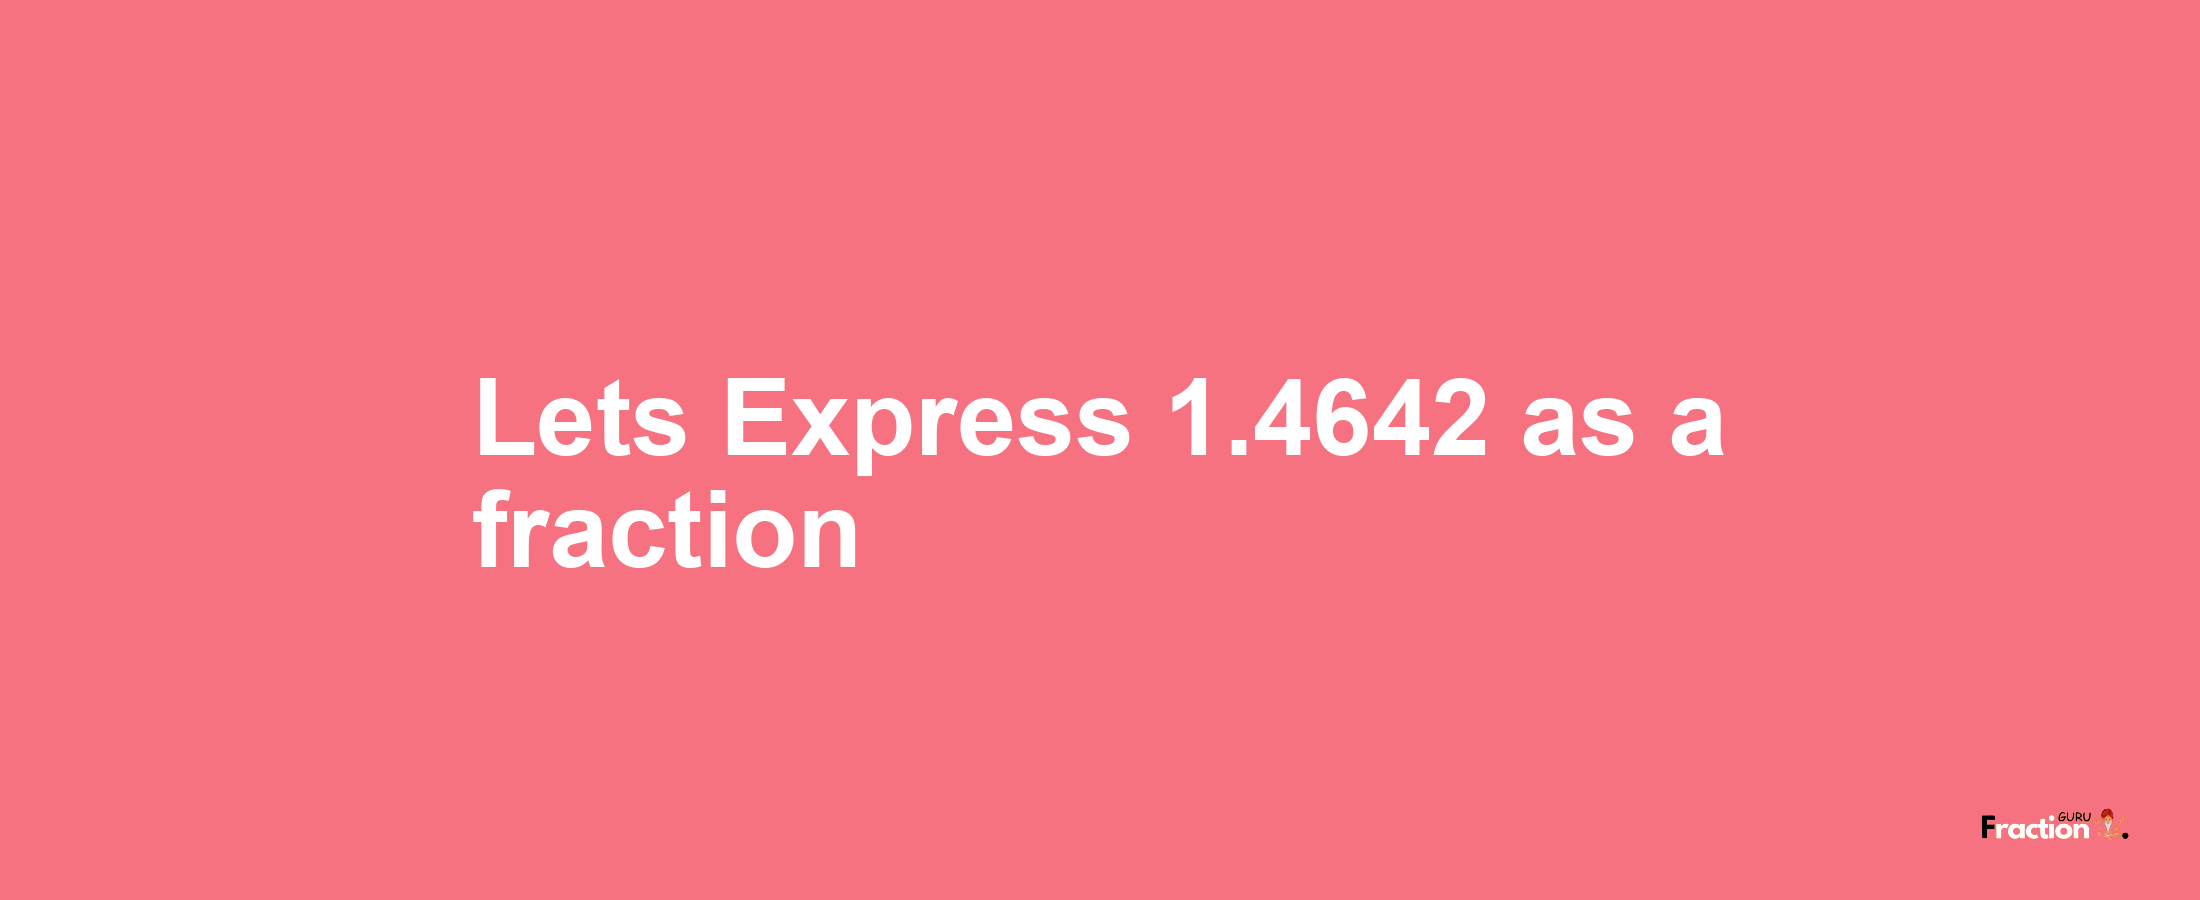 Lets Express 1.4642 as afraction